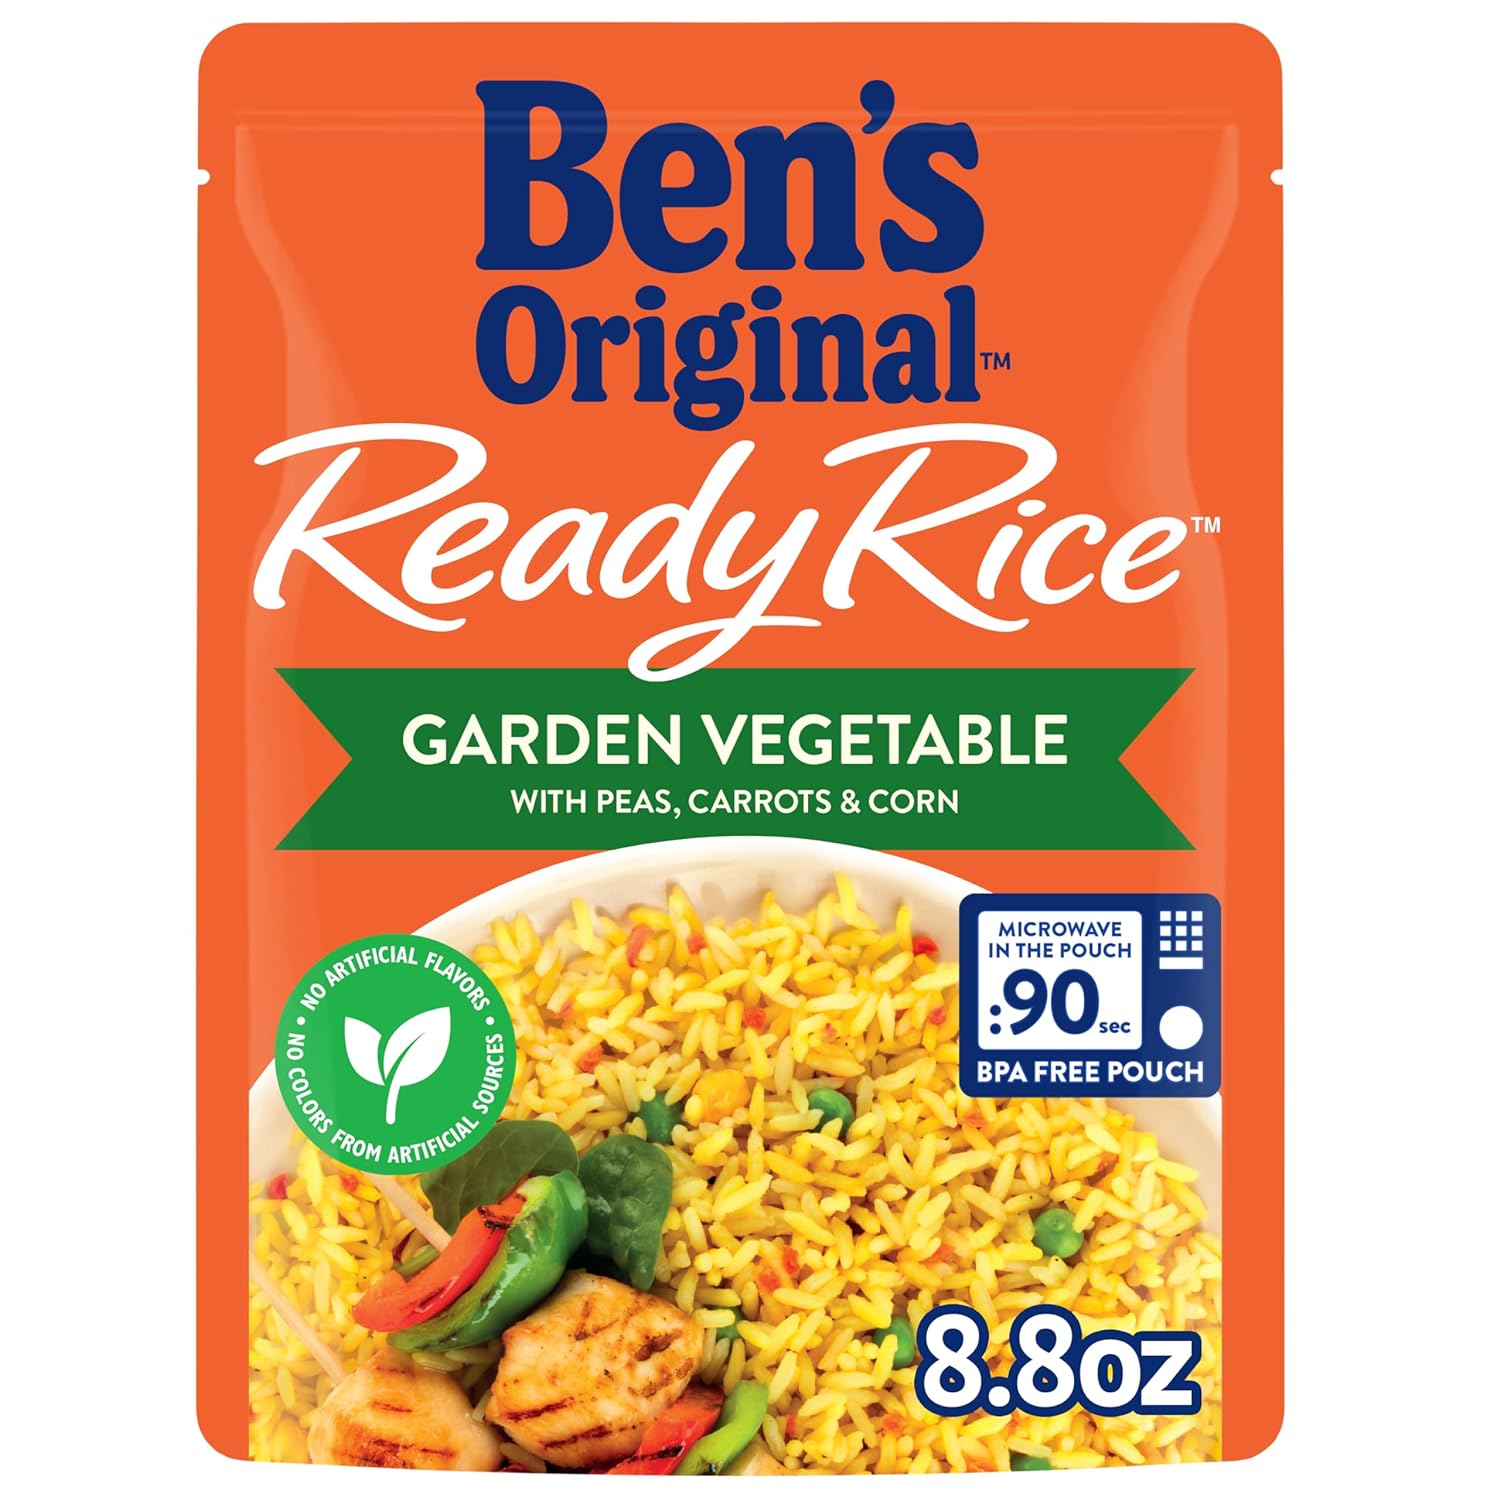 BEN'S ORIGINAL Ready Rice Garden Vegetable Flavored Rice, Easy Dinner Side, 8.8 OZ Pouch (Pack of 6)